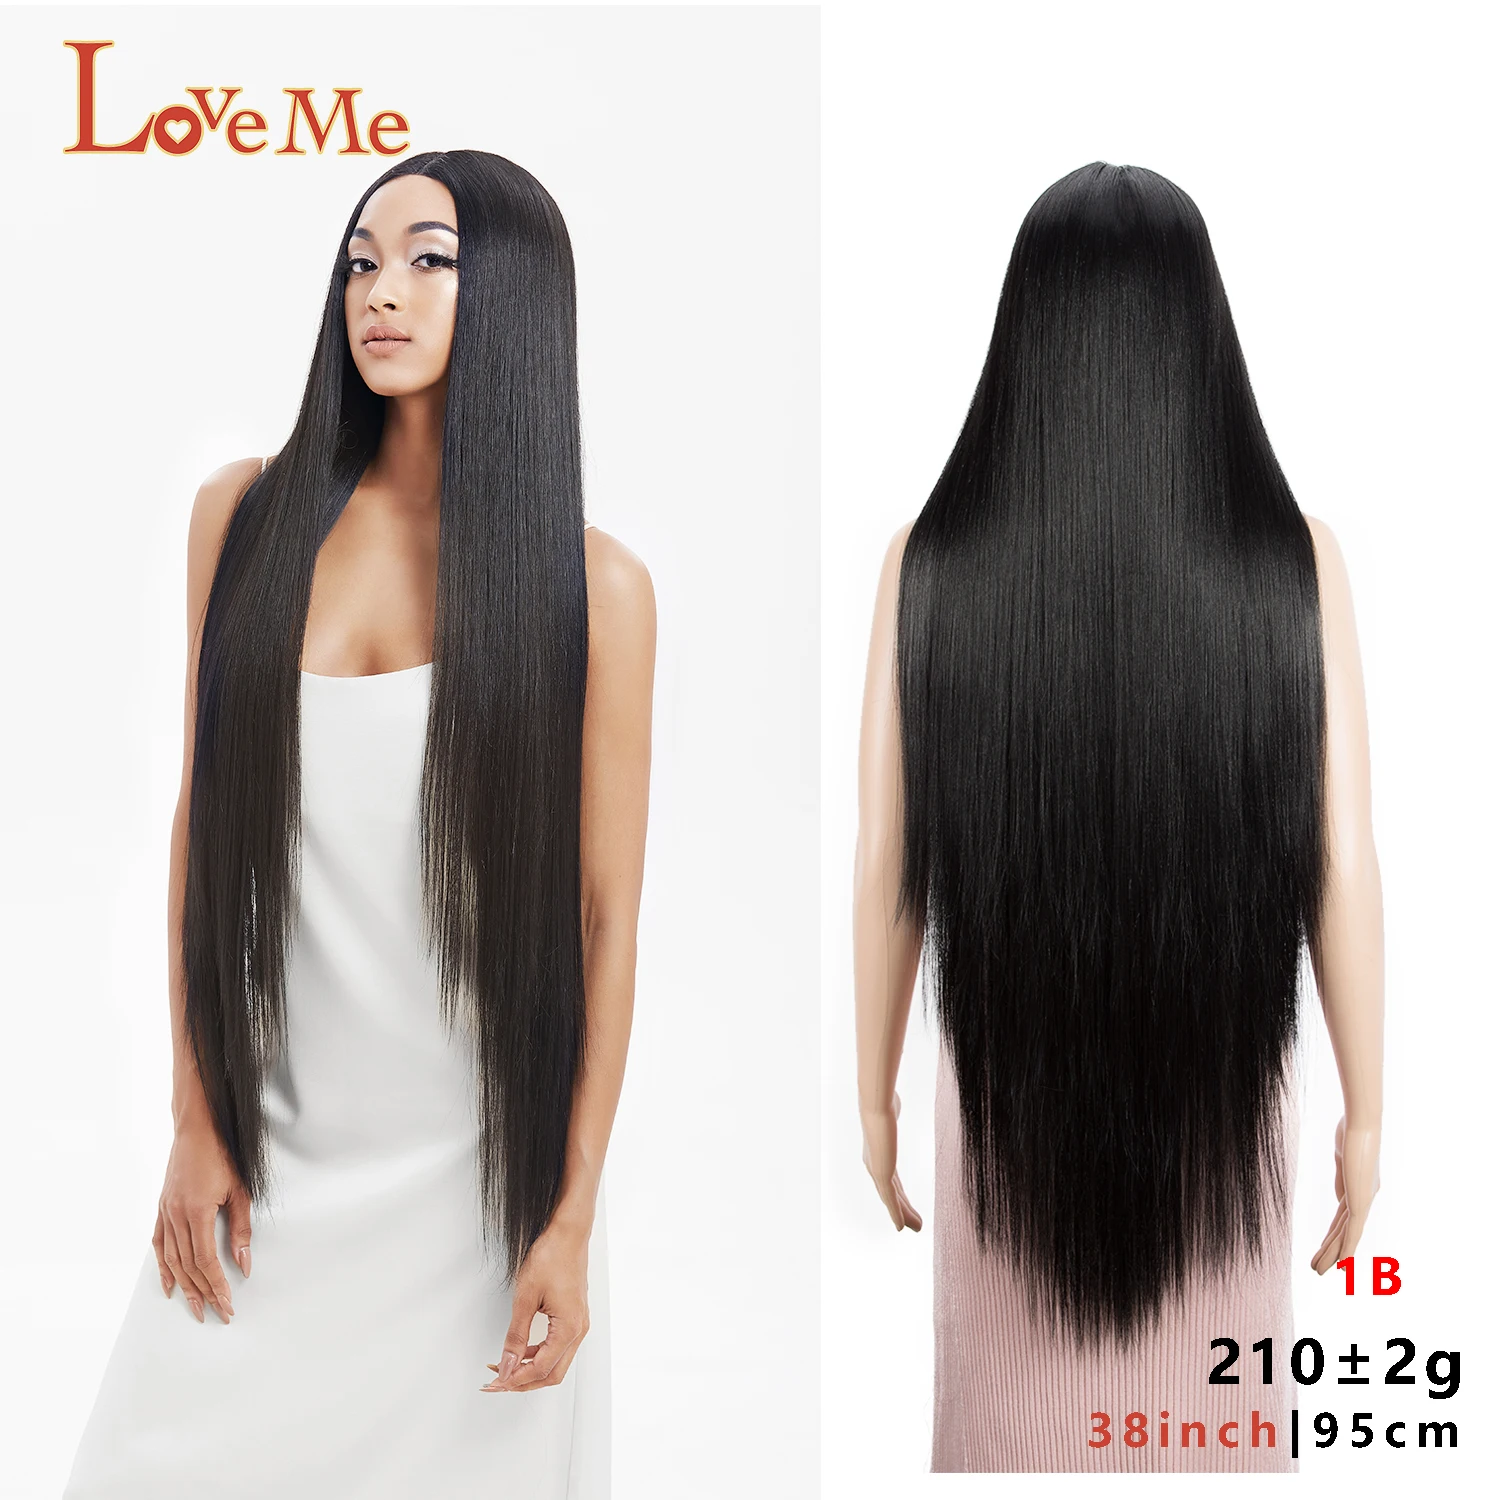 

LOVE ME 42 Inch Silk Straight Synthetic Wig Super Long Straight Black Color Fake Hair Cosplay Wig For Black Wome Lace Front Wigs